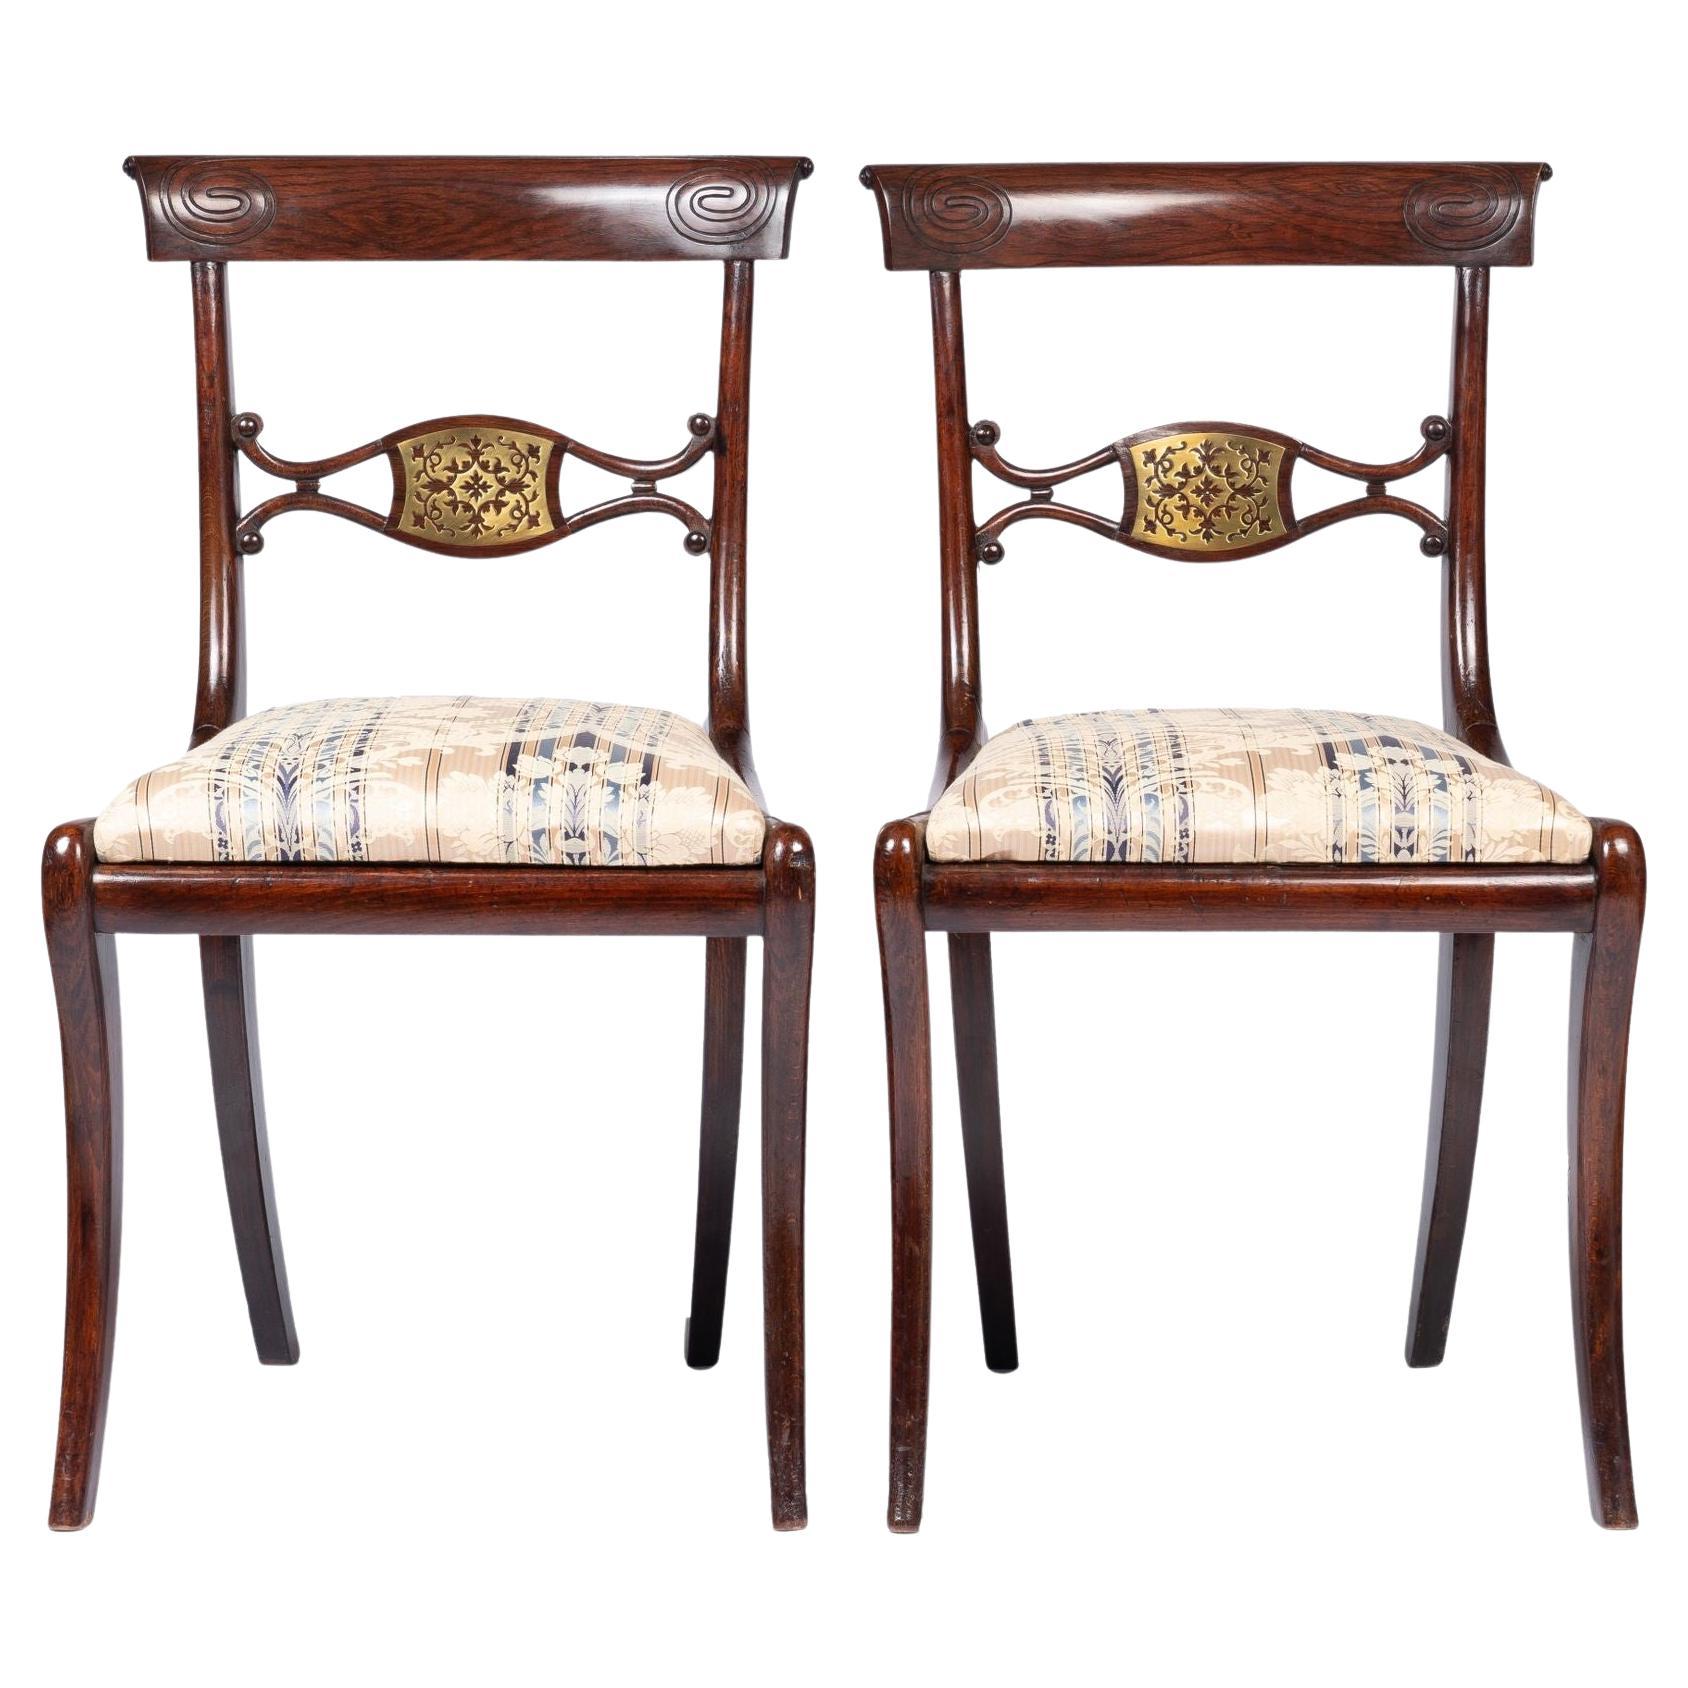 Pair of English Regency Upholstered Slip Seat Side Chairs, 1815